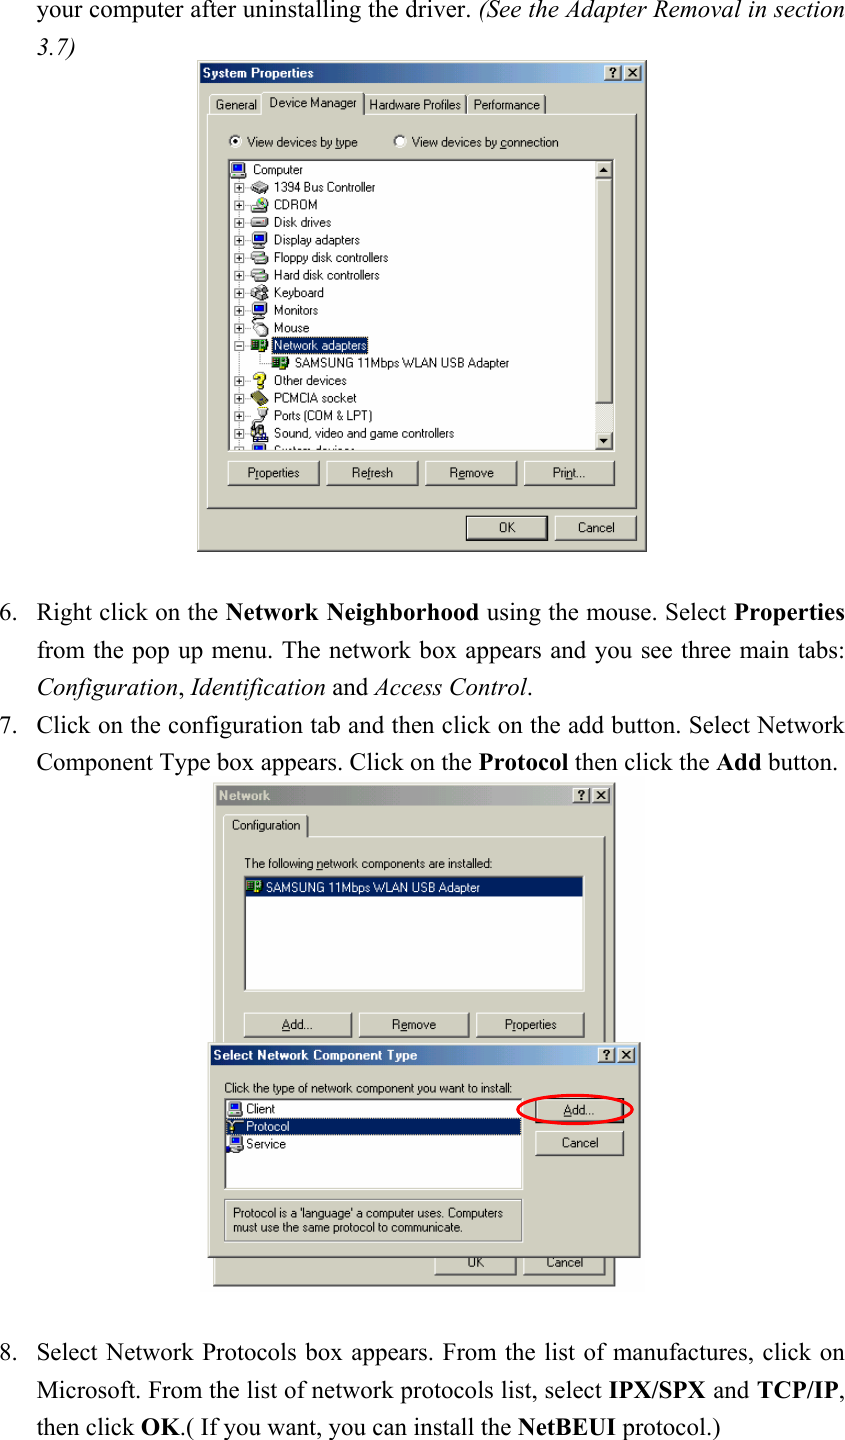  your computer after uninstalling the driver. (See the Adapter Removal in section 3.7)    6. Right click on the Network Neighborhood using the mouse. Select Properties from the pop up menu. The network box appears and you see three main tabs: Configuration, Identification and Access Control. 7. Click on the configuration tab and then click on the add button. Select Network      Component Type box appears. Click on the Protocol then click the Add button.   8. Select Network Protocols box appears. From the list of manufactures, click on Microsoft. From the list of network protocols list, select IPX/SPX and TCP/IP, then click OK.( If you want, you can install the NetBEUI protocol.) 